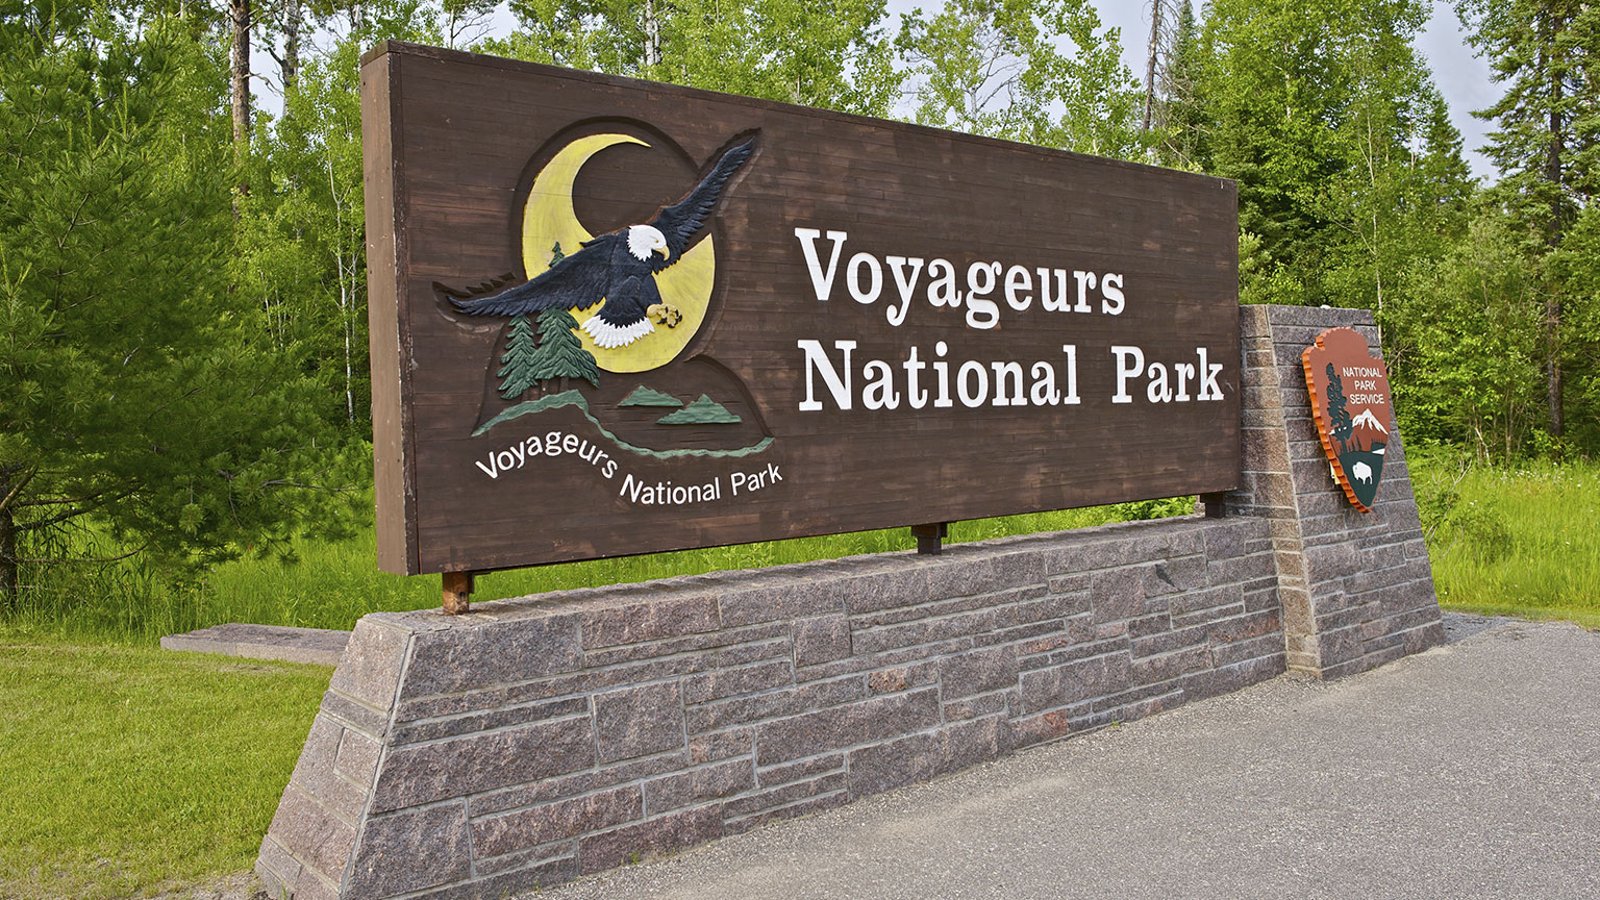 Voyageurs, Isle Royale, the Canadian Shield